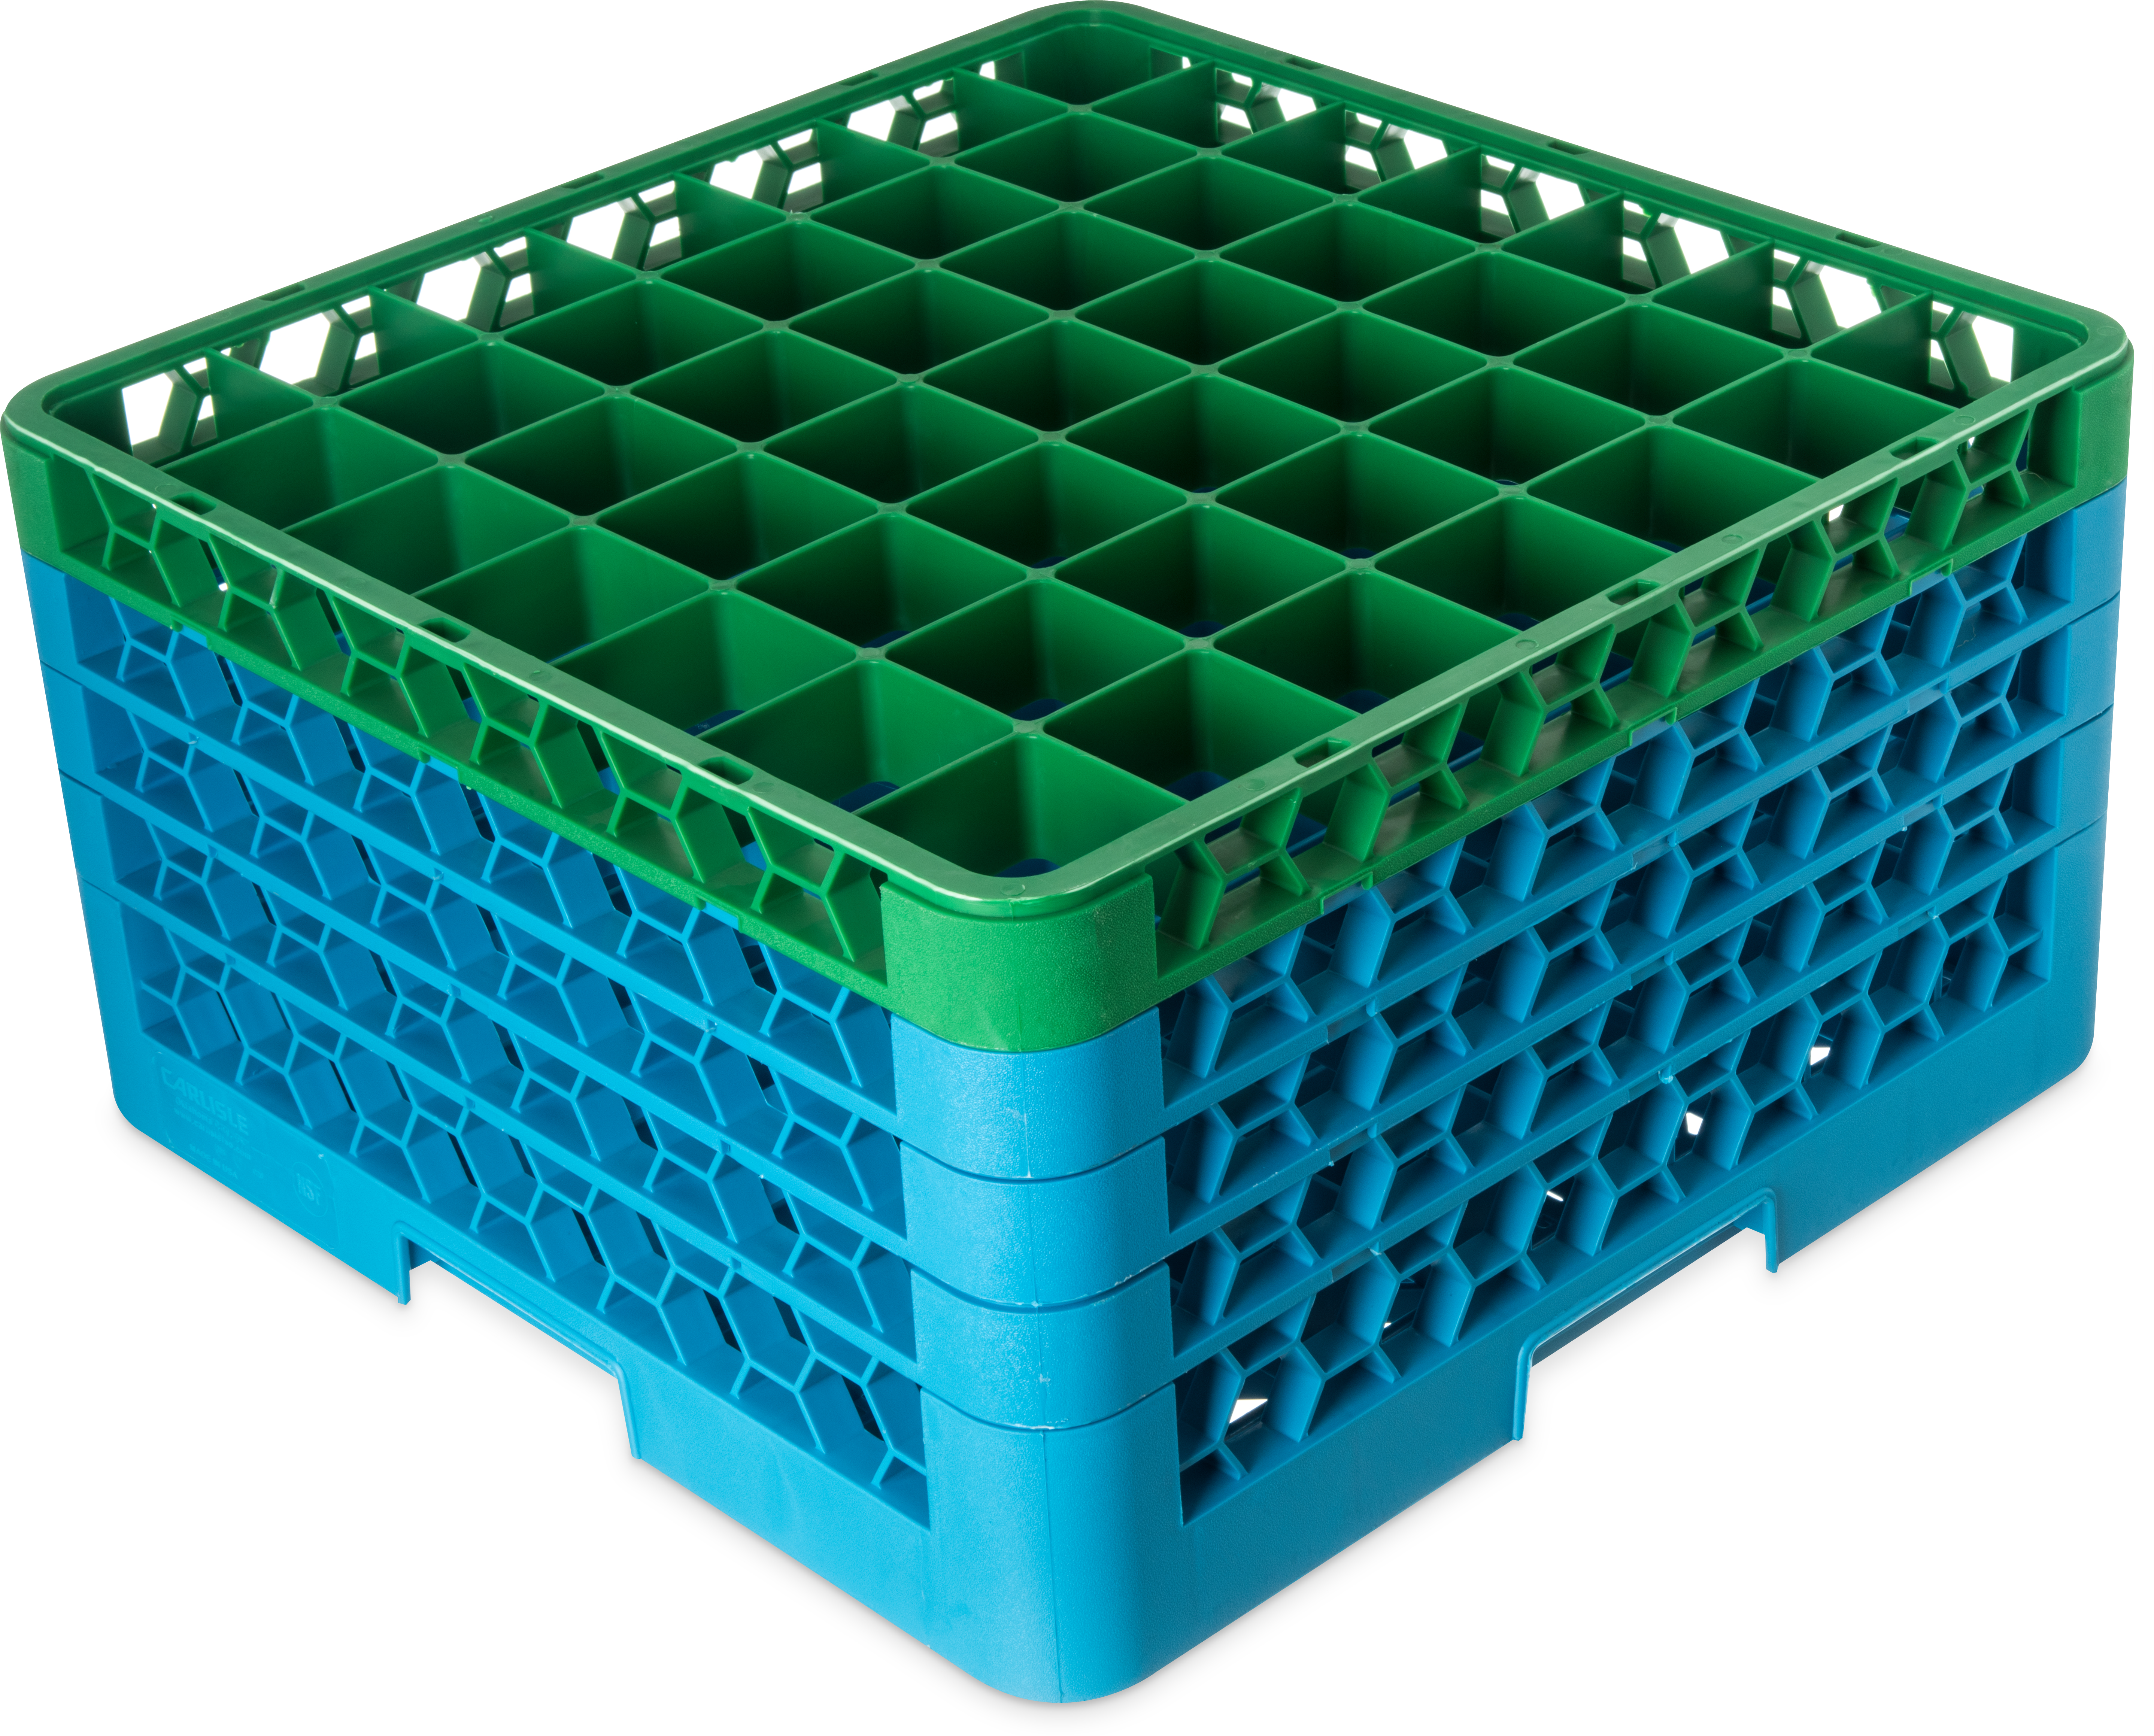 OptiClean 49 Compartment Glass Rack with 4 Extenders 10.3 - Green-Carlisle Blue